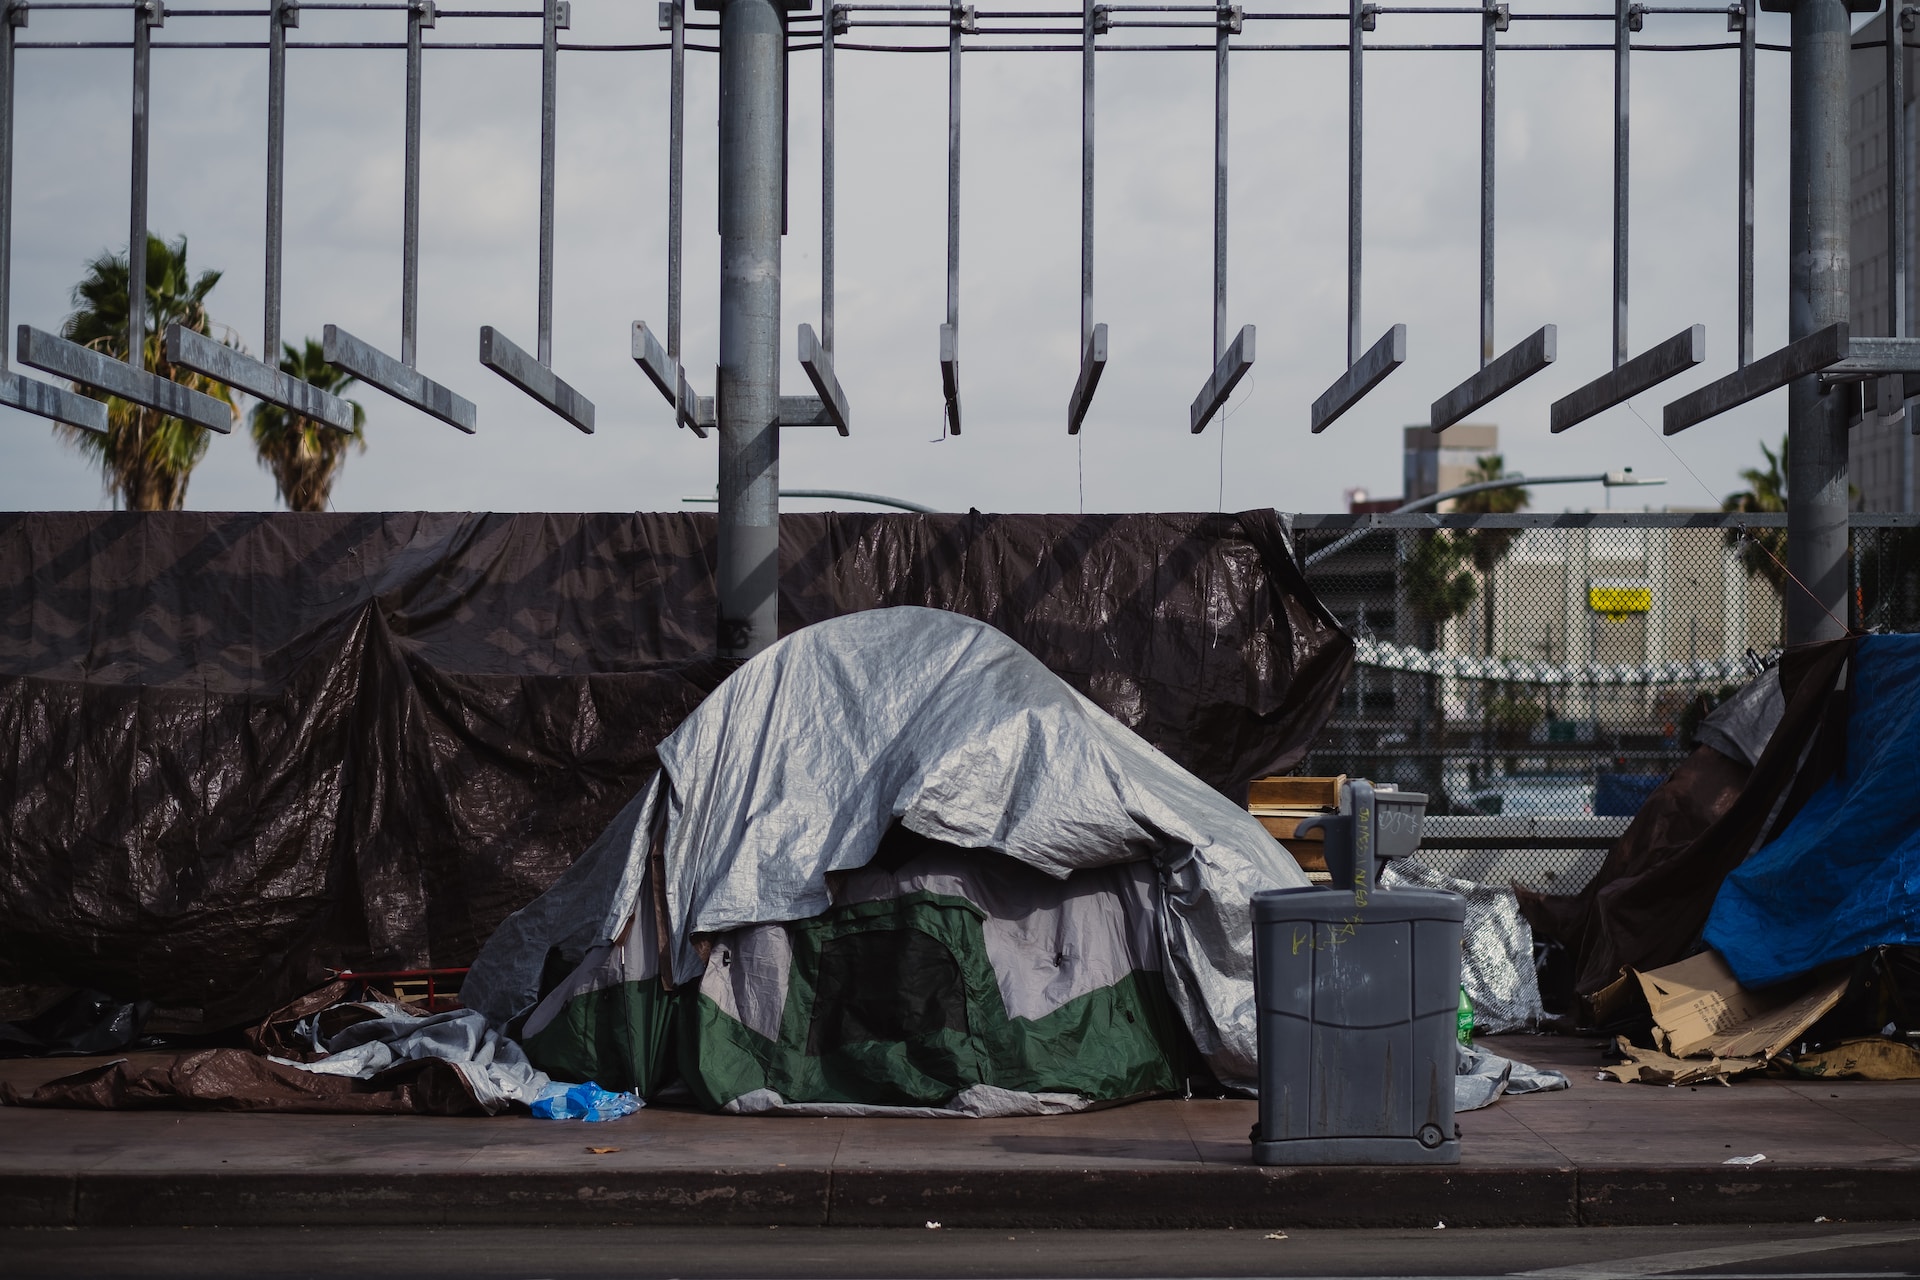 A tent on the street